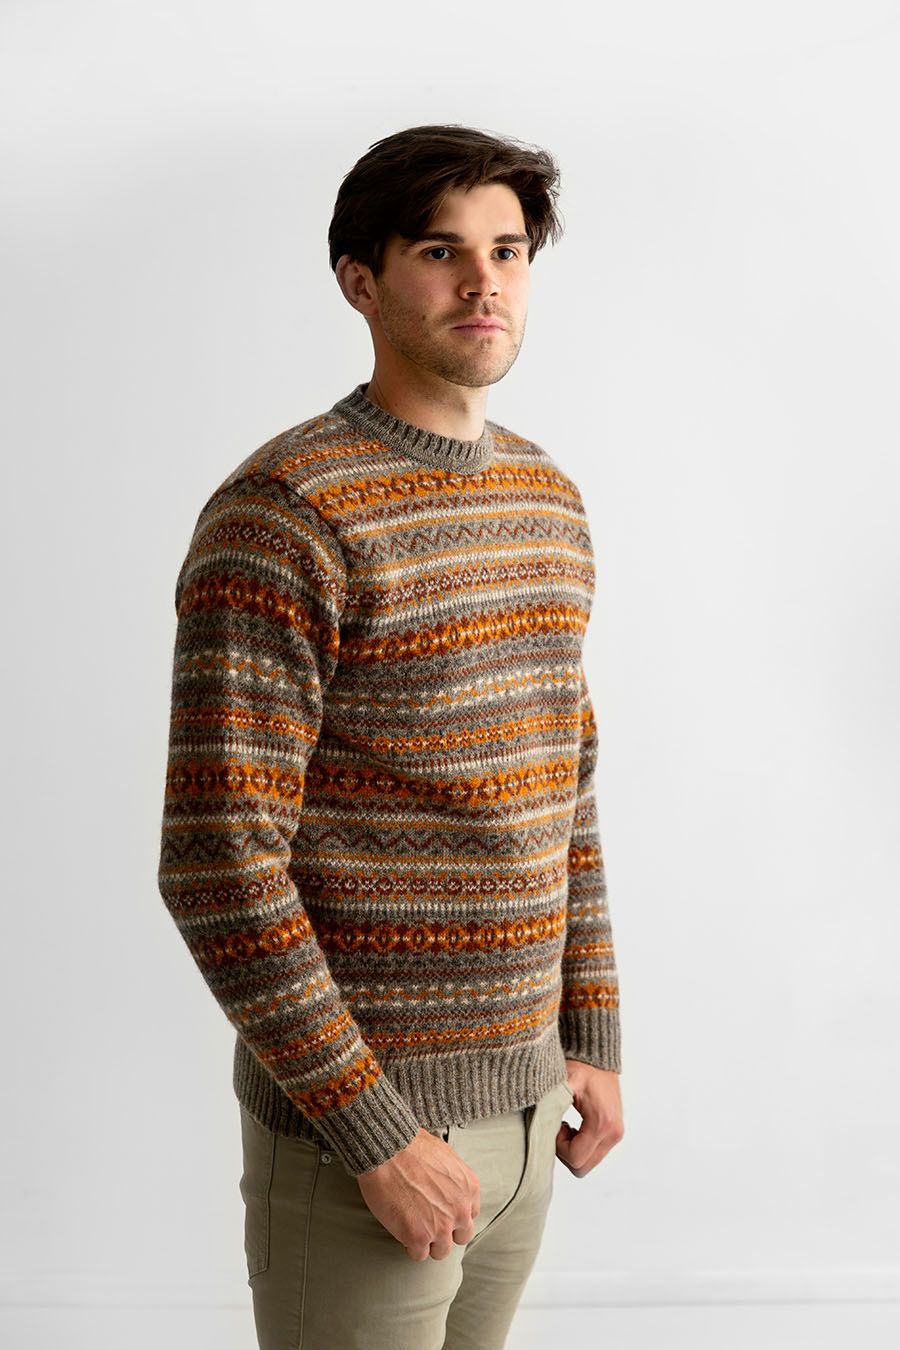 Tom Audreath Immunitet Møde Mens Fair isle "Kinnaird" Jumper in oyster colourway with patterns in rich  spice shades of orange. Scottish made with shetland-character wool. - The  Croft House